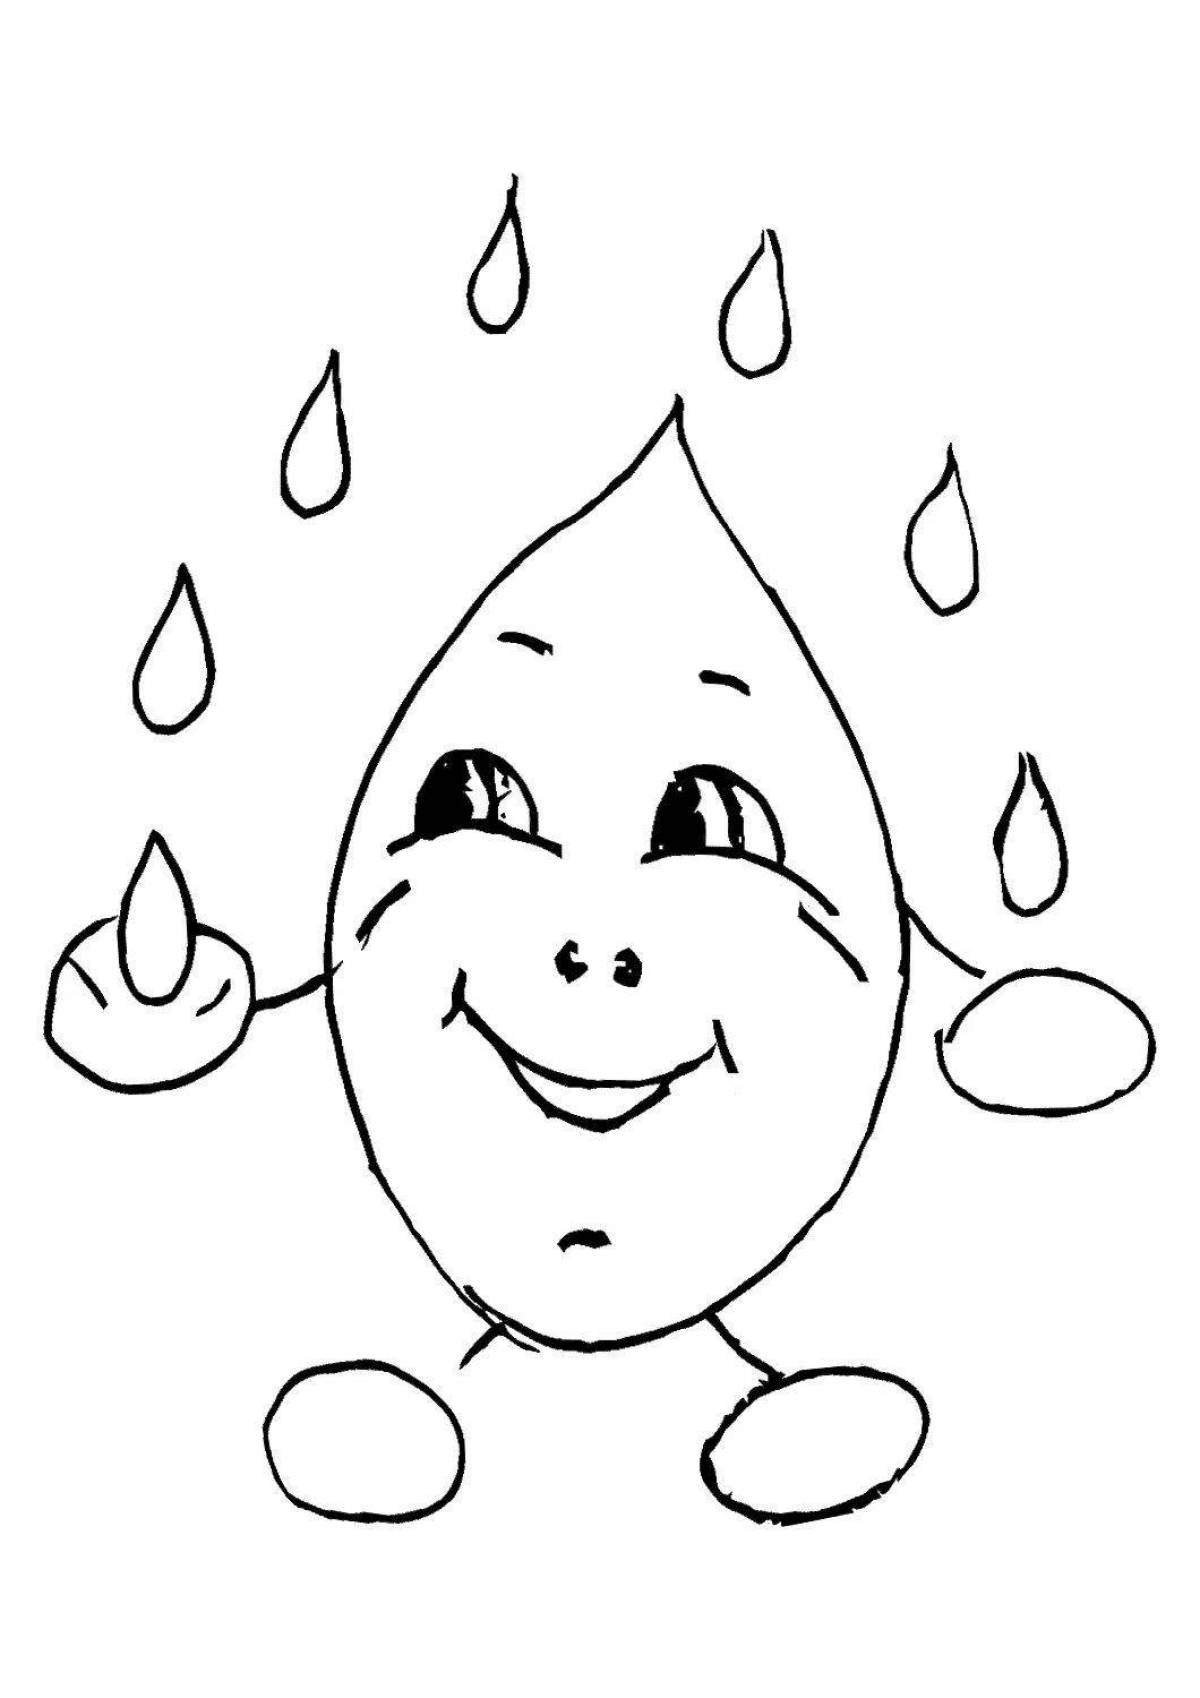 Shimmering water drop coloring page